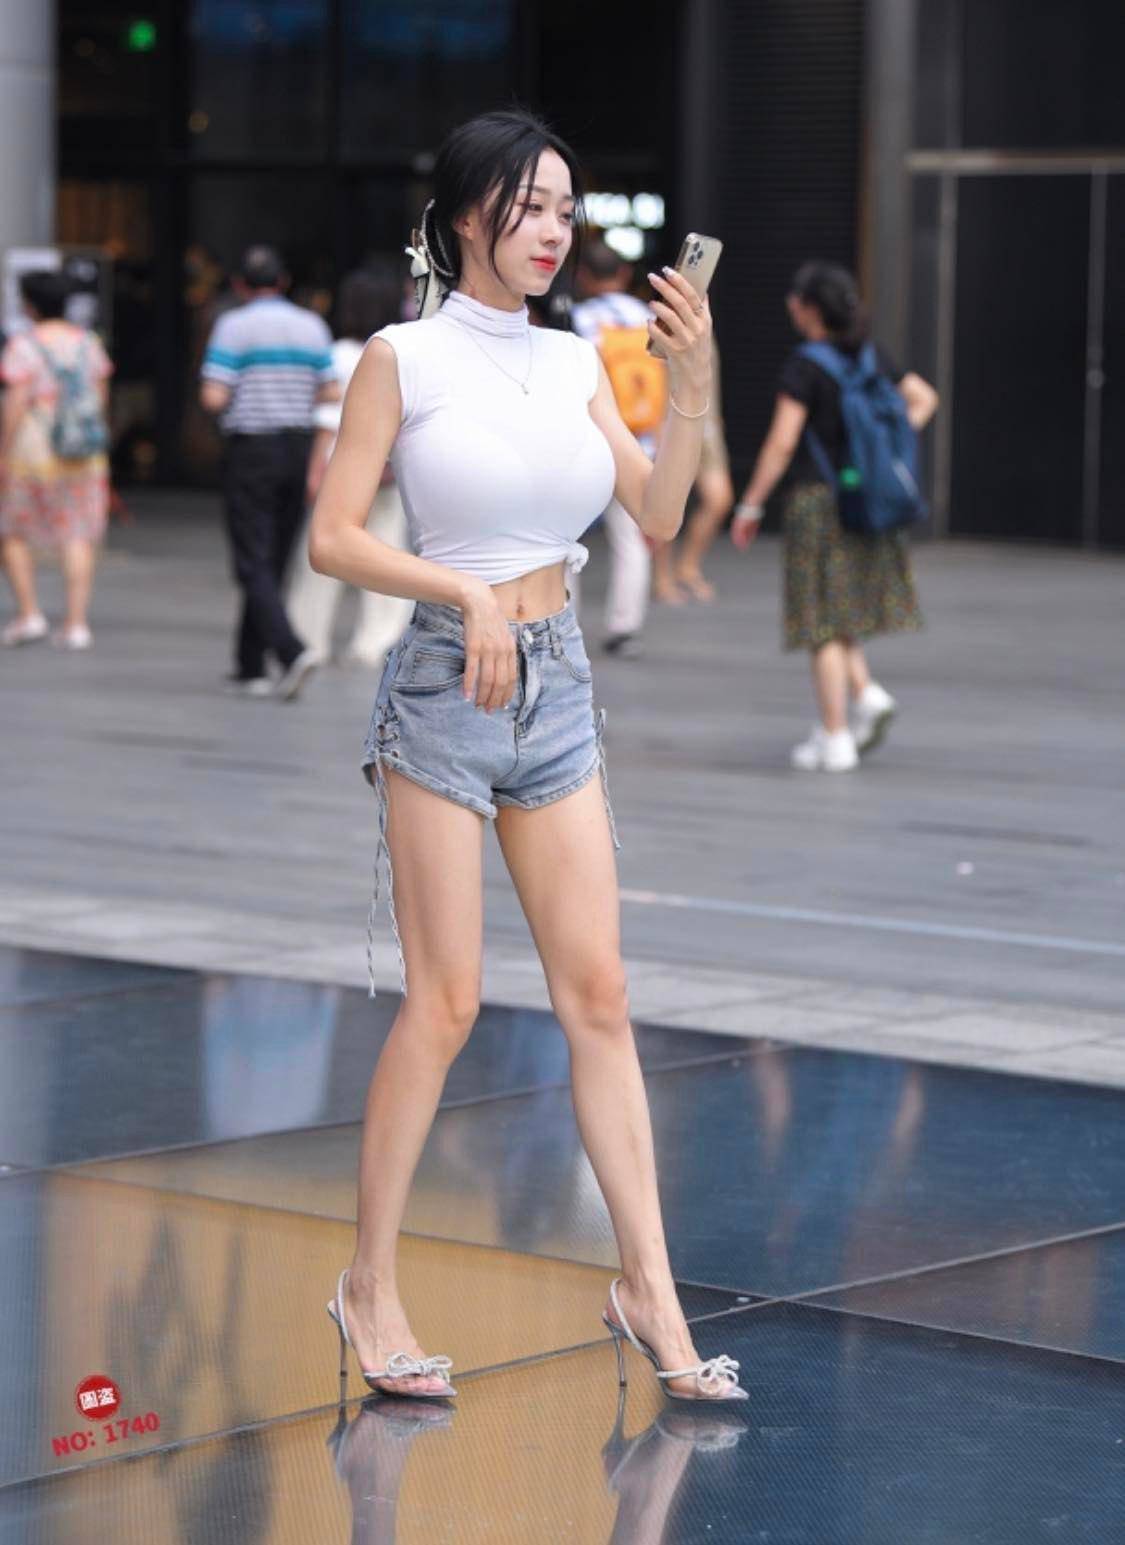 The beauty with an oversized bust loses points because of the stretchy shirt on the street - 4